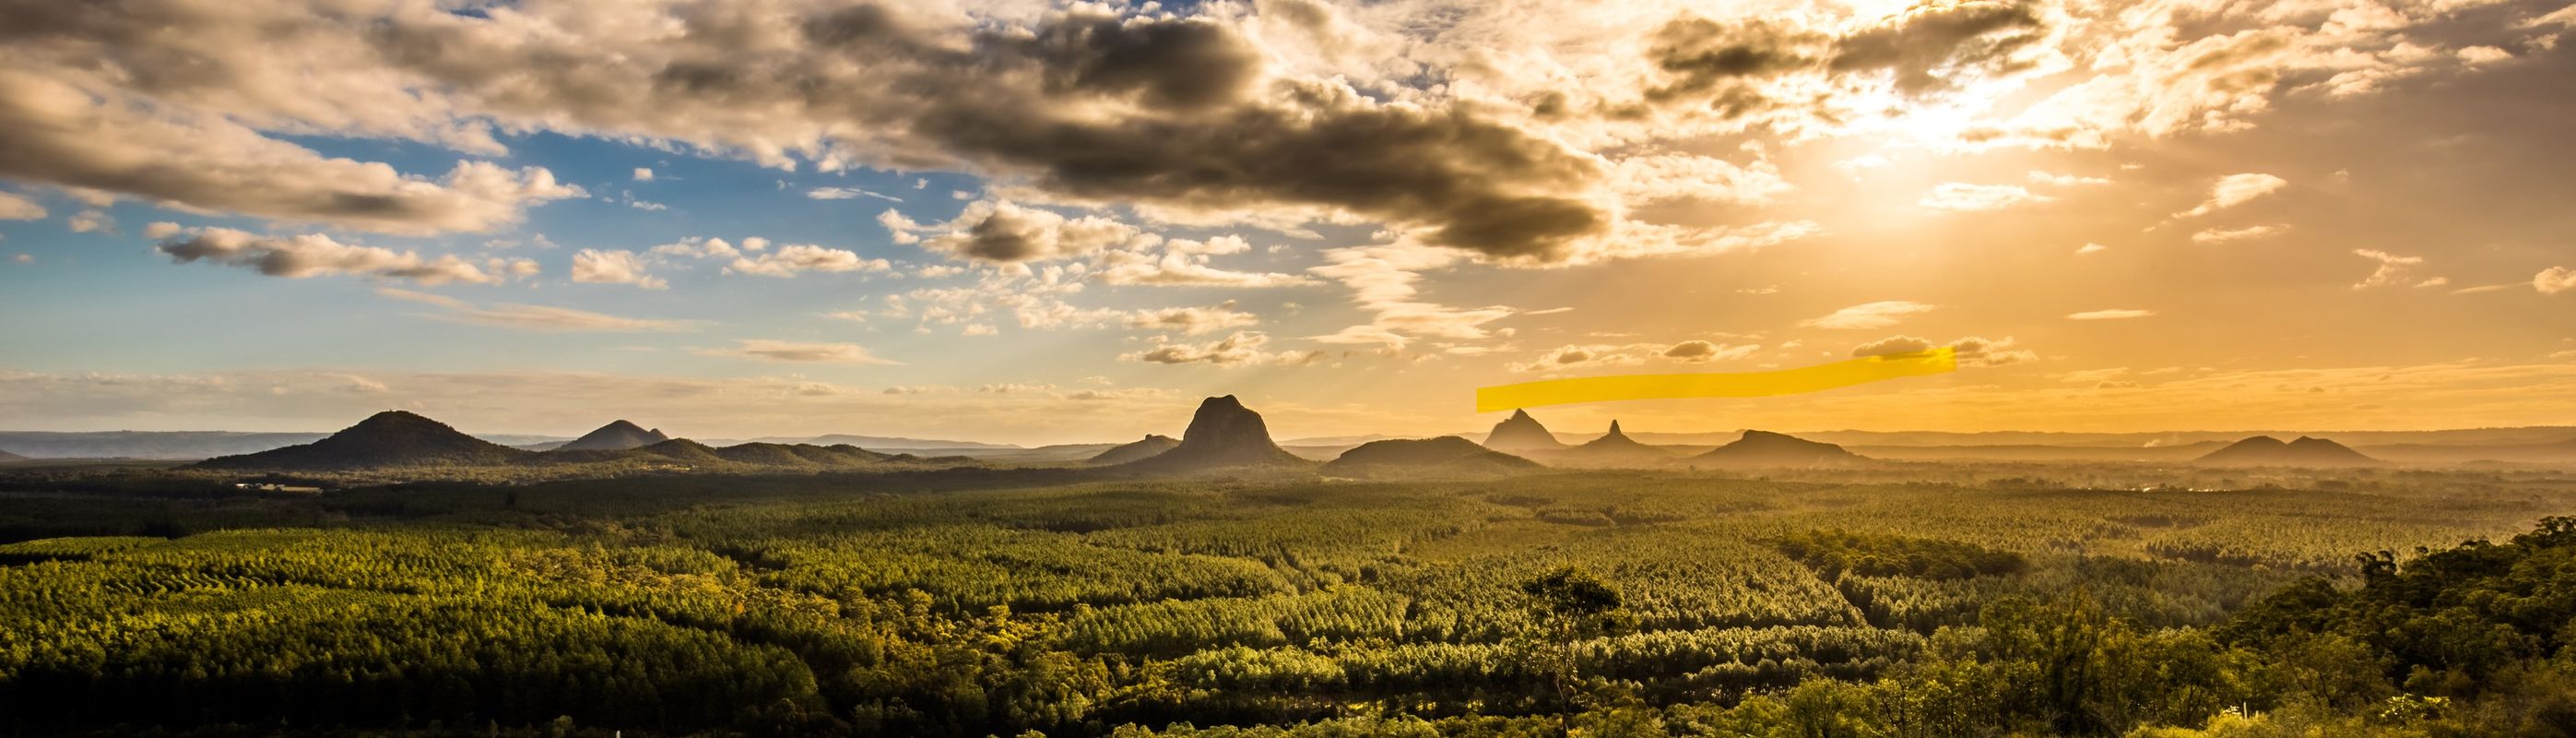 Glass House Mountains View